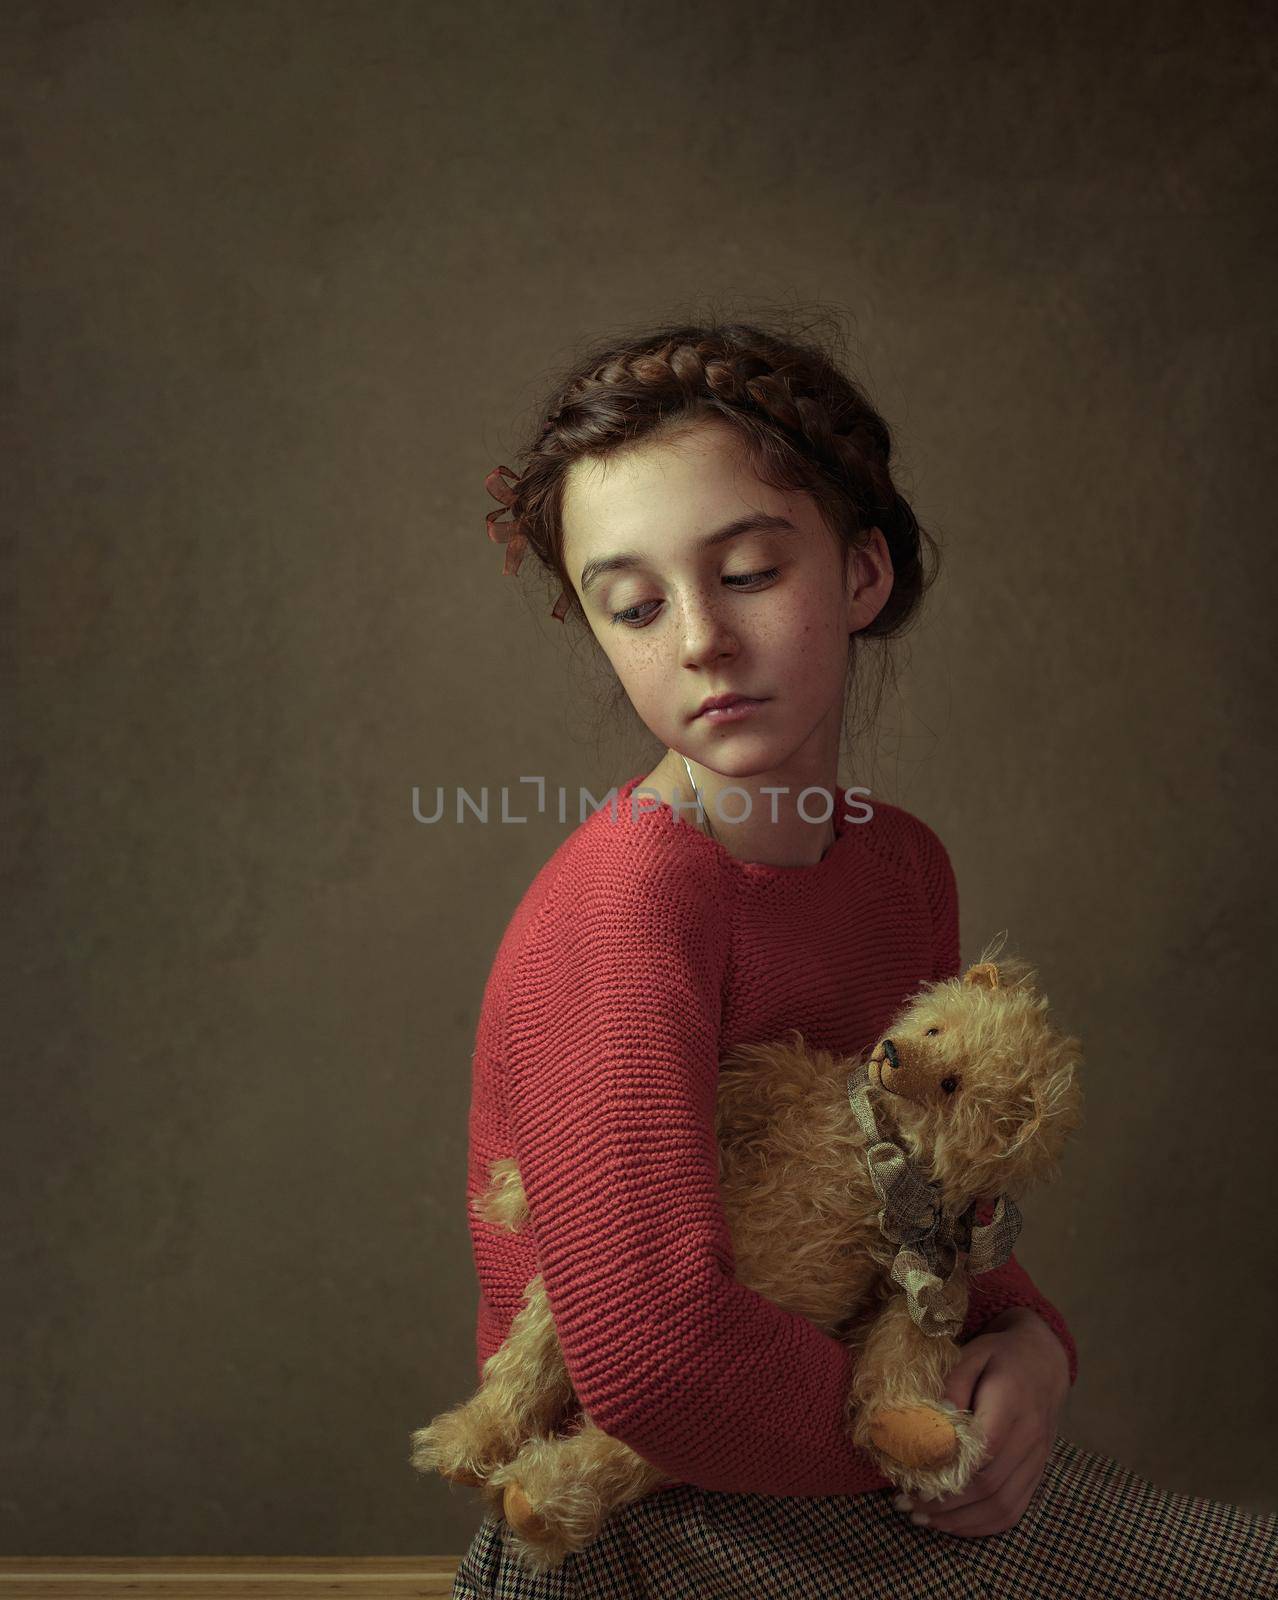 a girl with dark hair and a pigtail around her head in a red sweater is standing and holding her teddy bear toy in her hands by Costin